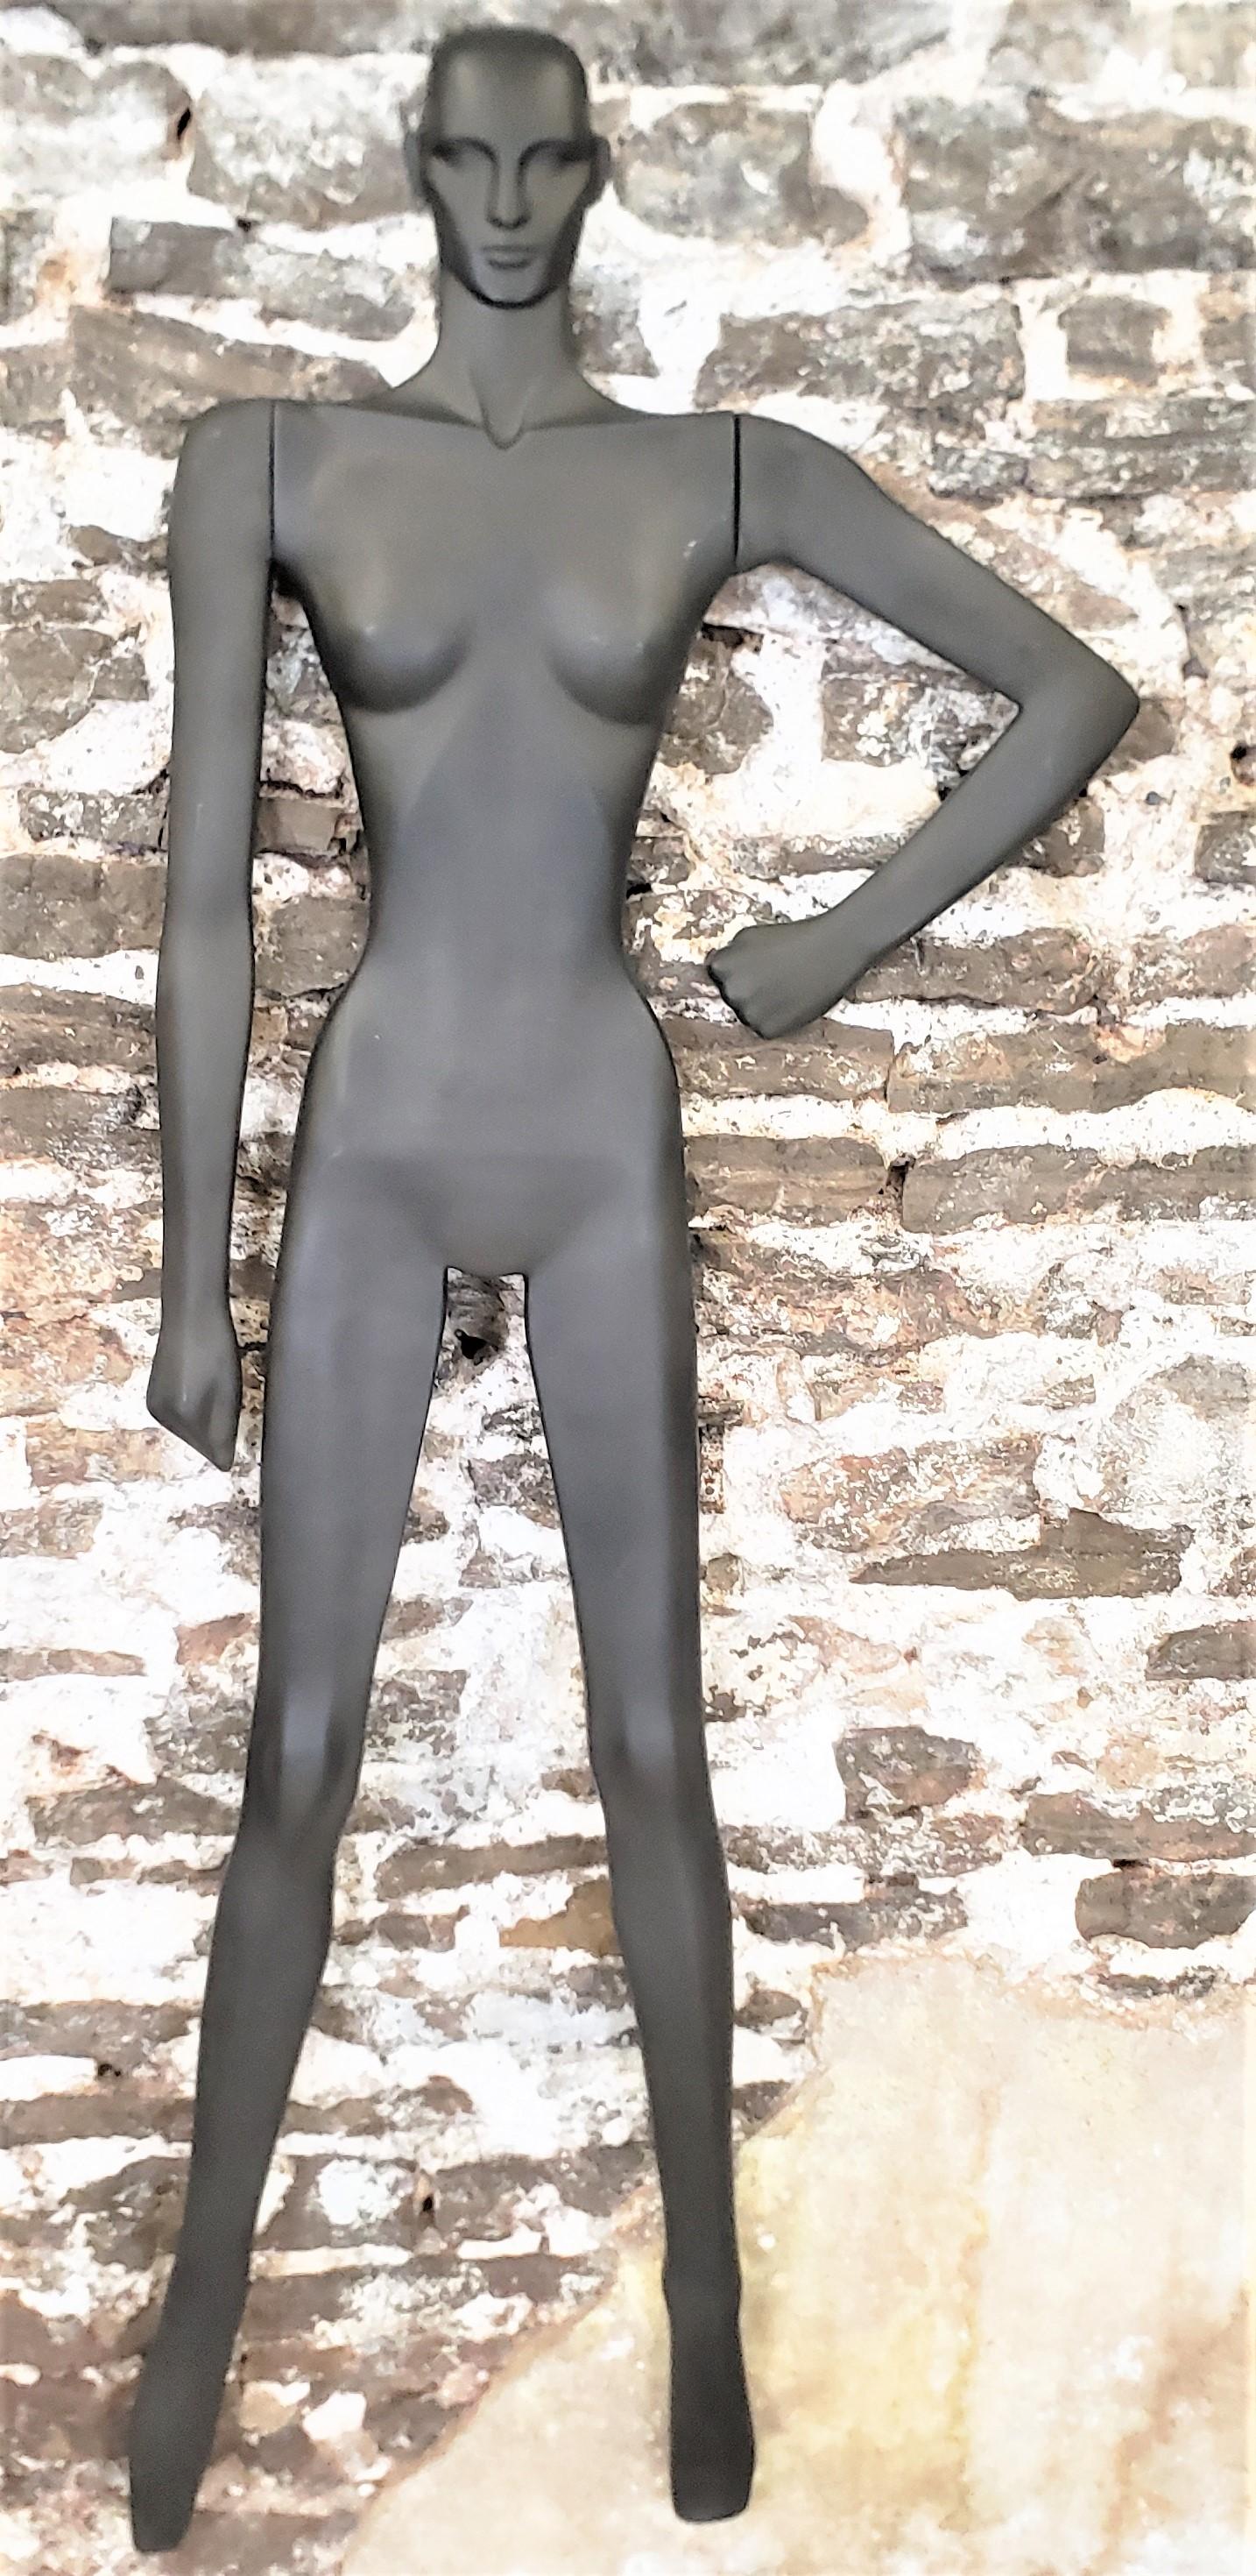 Pair of Vintage Stylized Nude Female Wall Mounted Sculptures or Manequins In Good Condition For Sale In Hamilton, Ontario